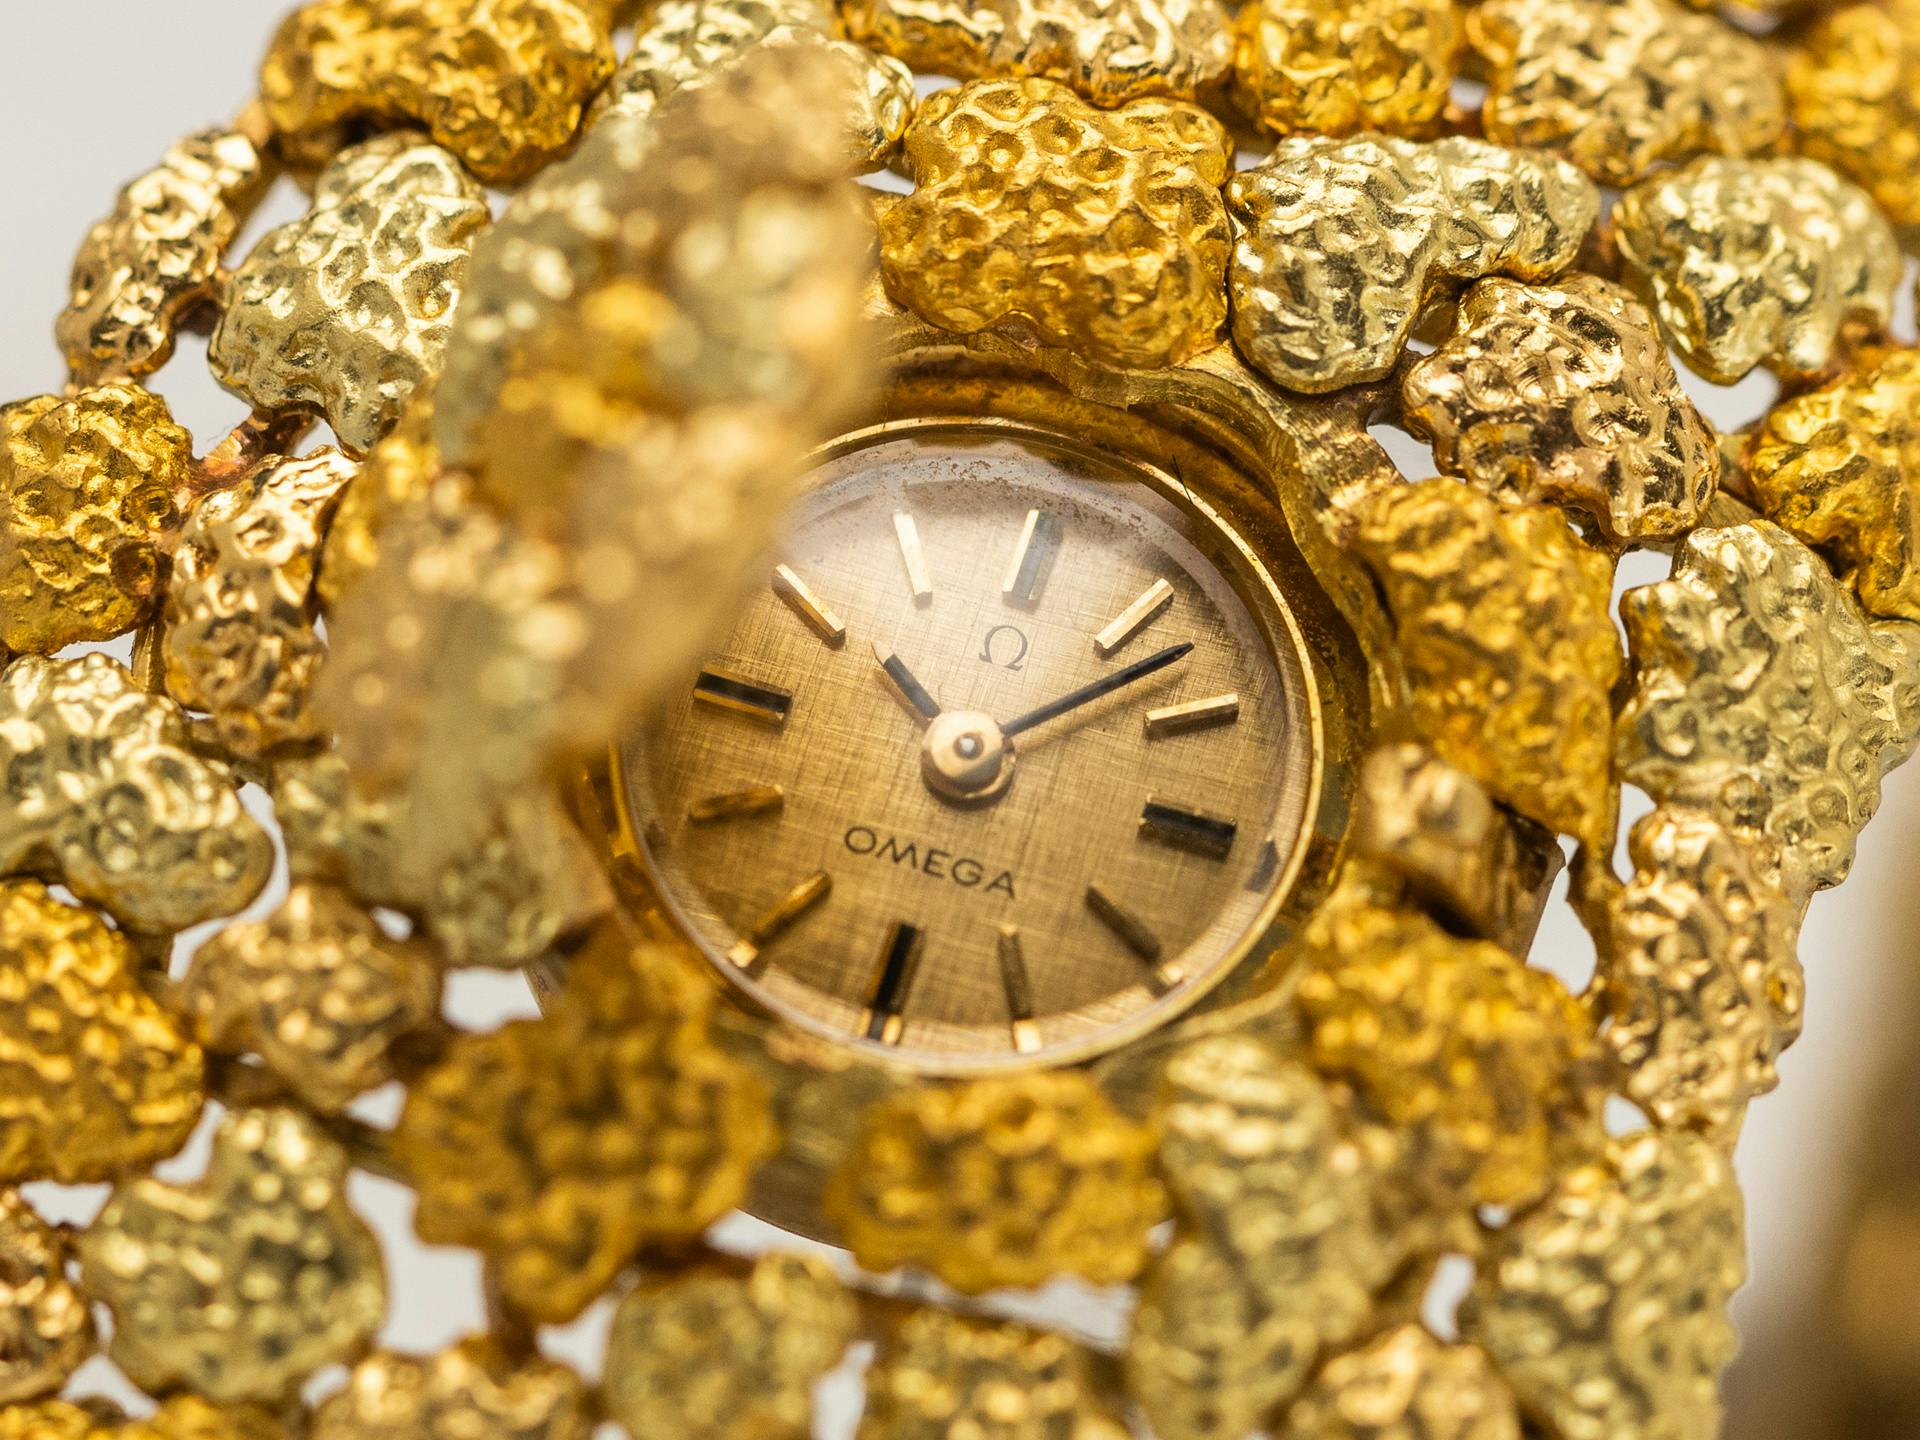 Omega Ladies Bracelet Watch was designed in the 1960s by the famous designer Gilbert Albert. The watch movement is covered by the gold nugget design.